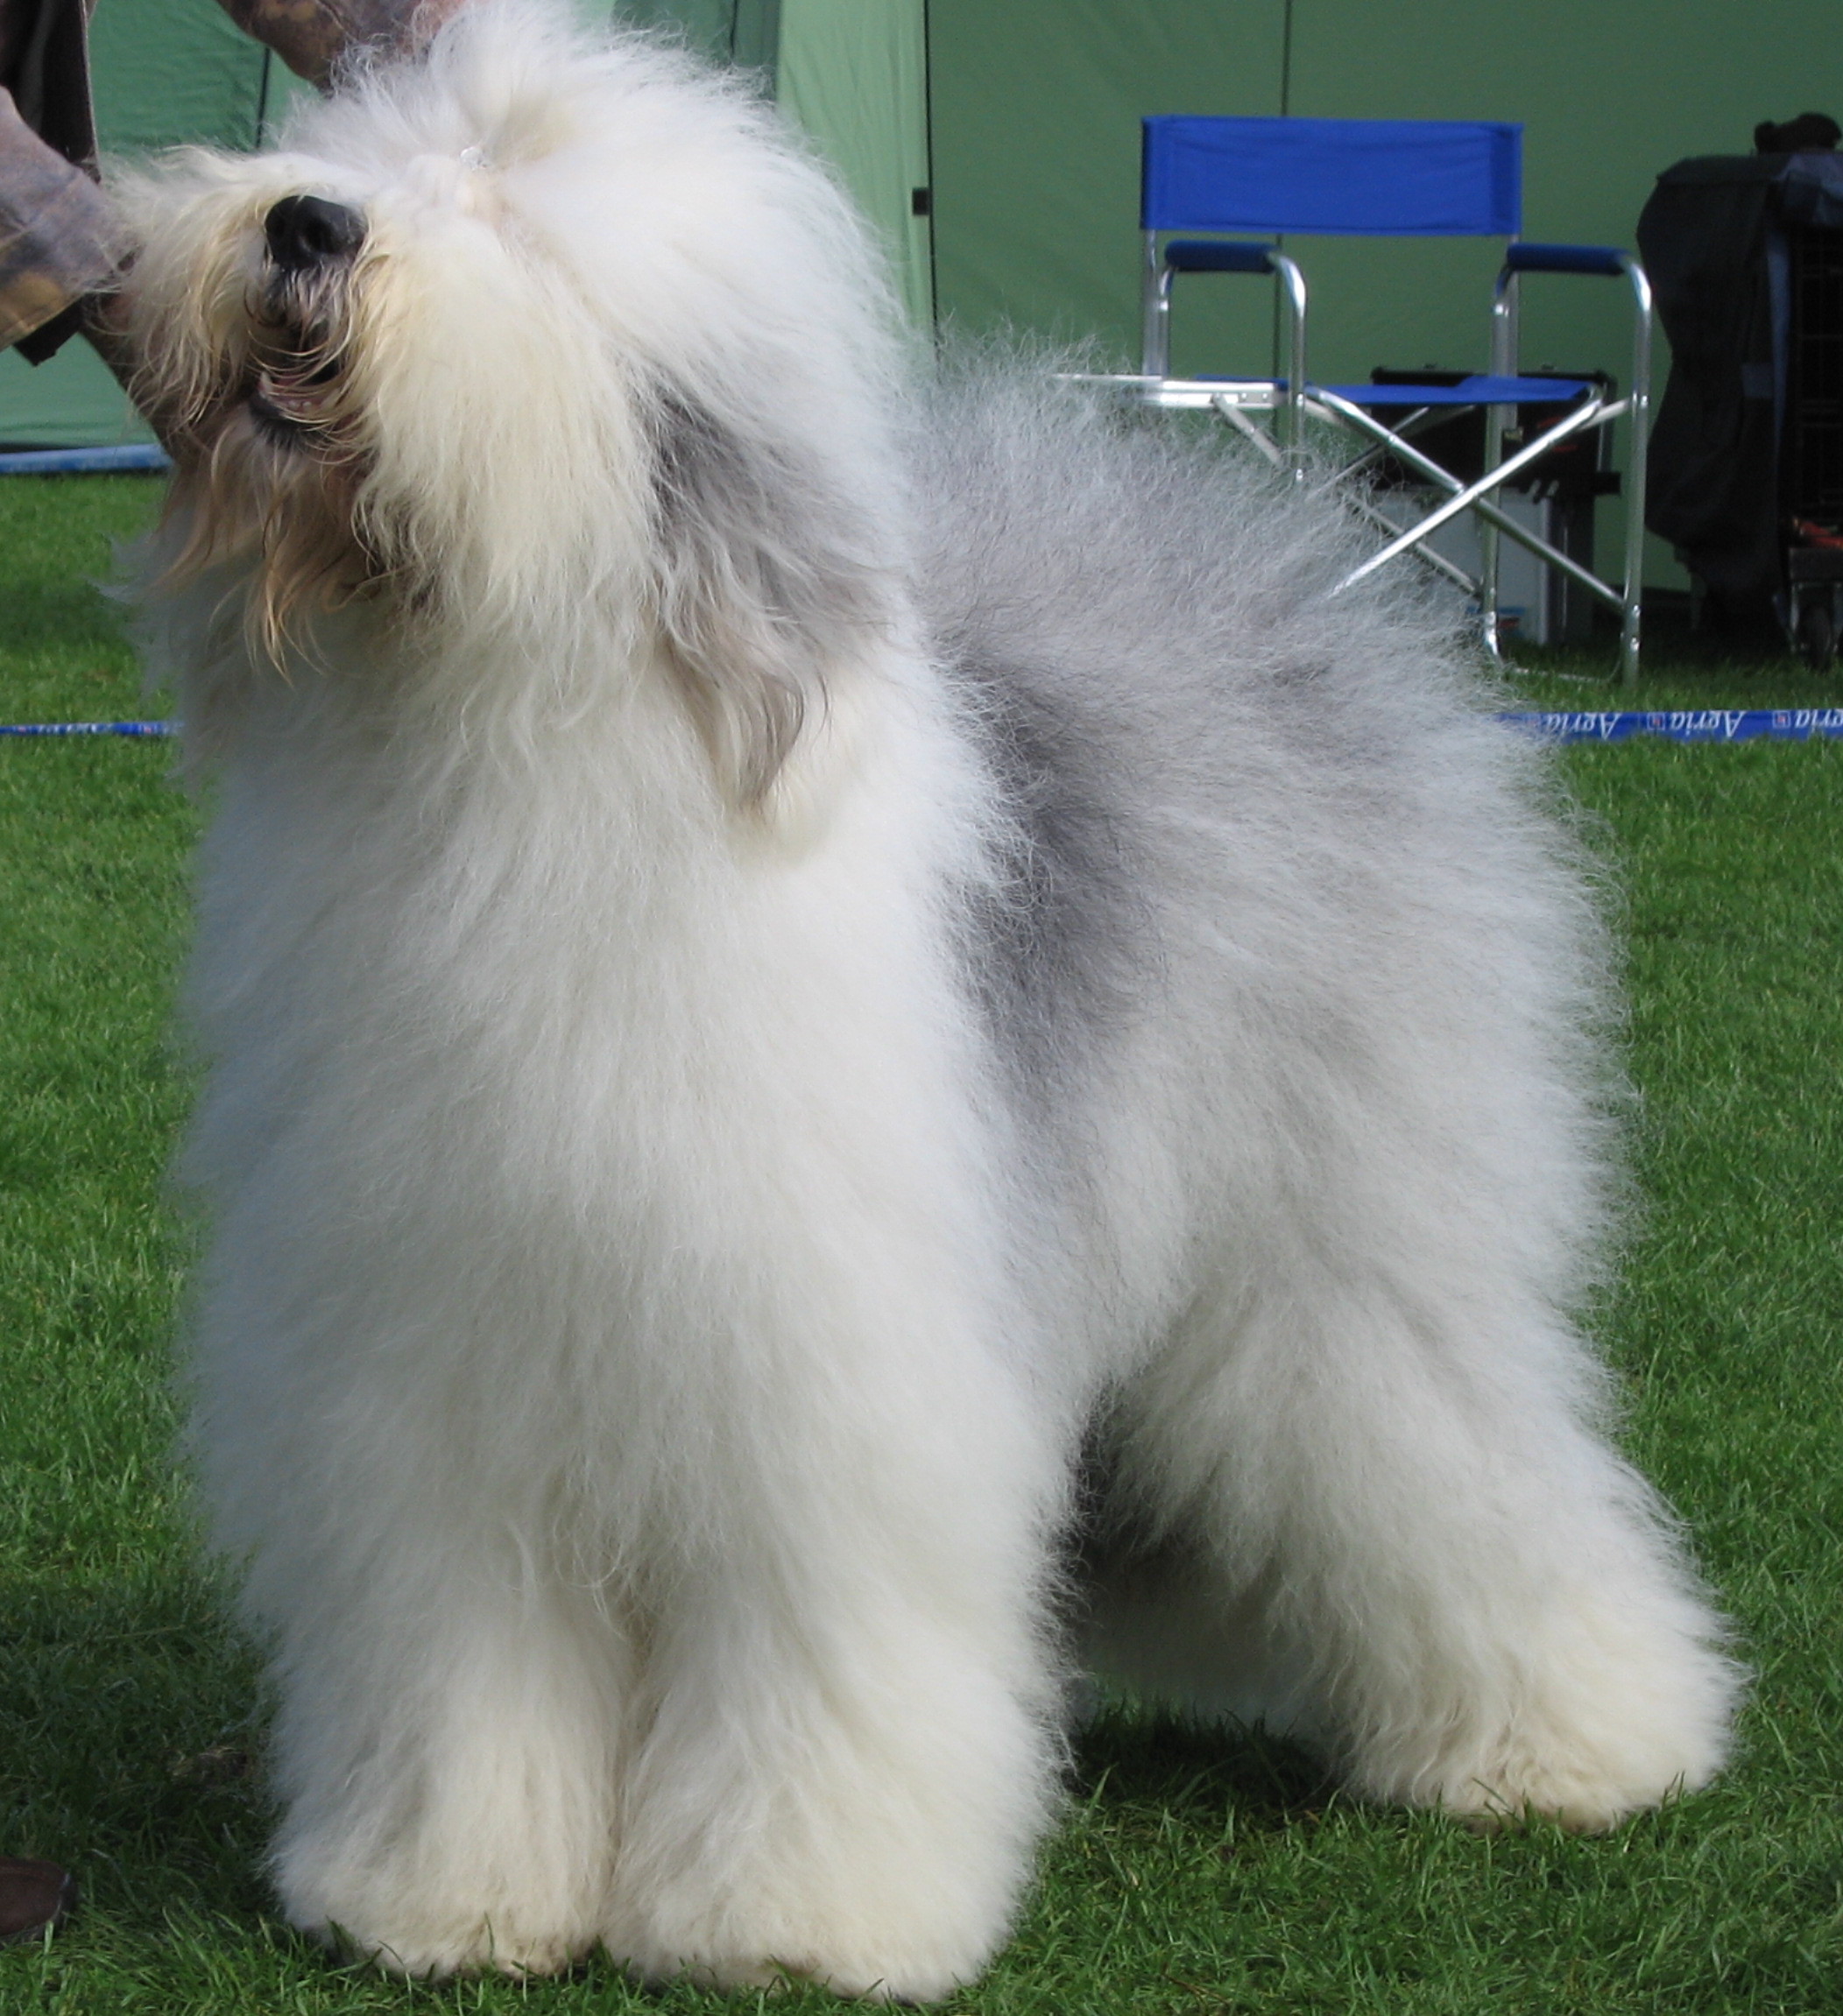 Old English Sheepdog photos and wallpapers The beautiful Old English